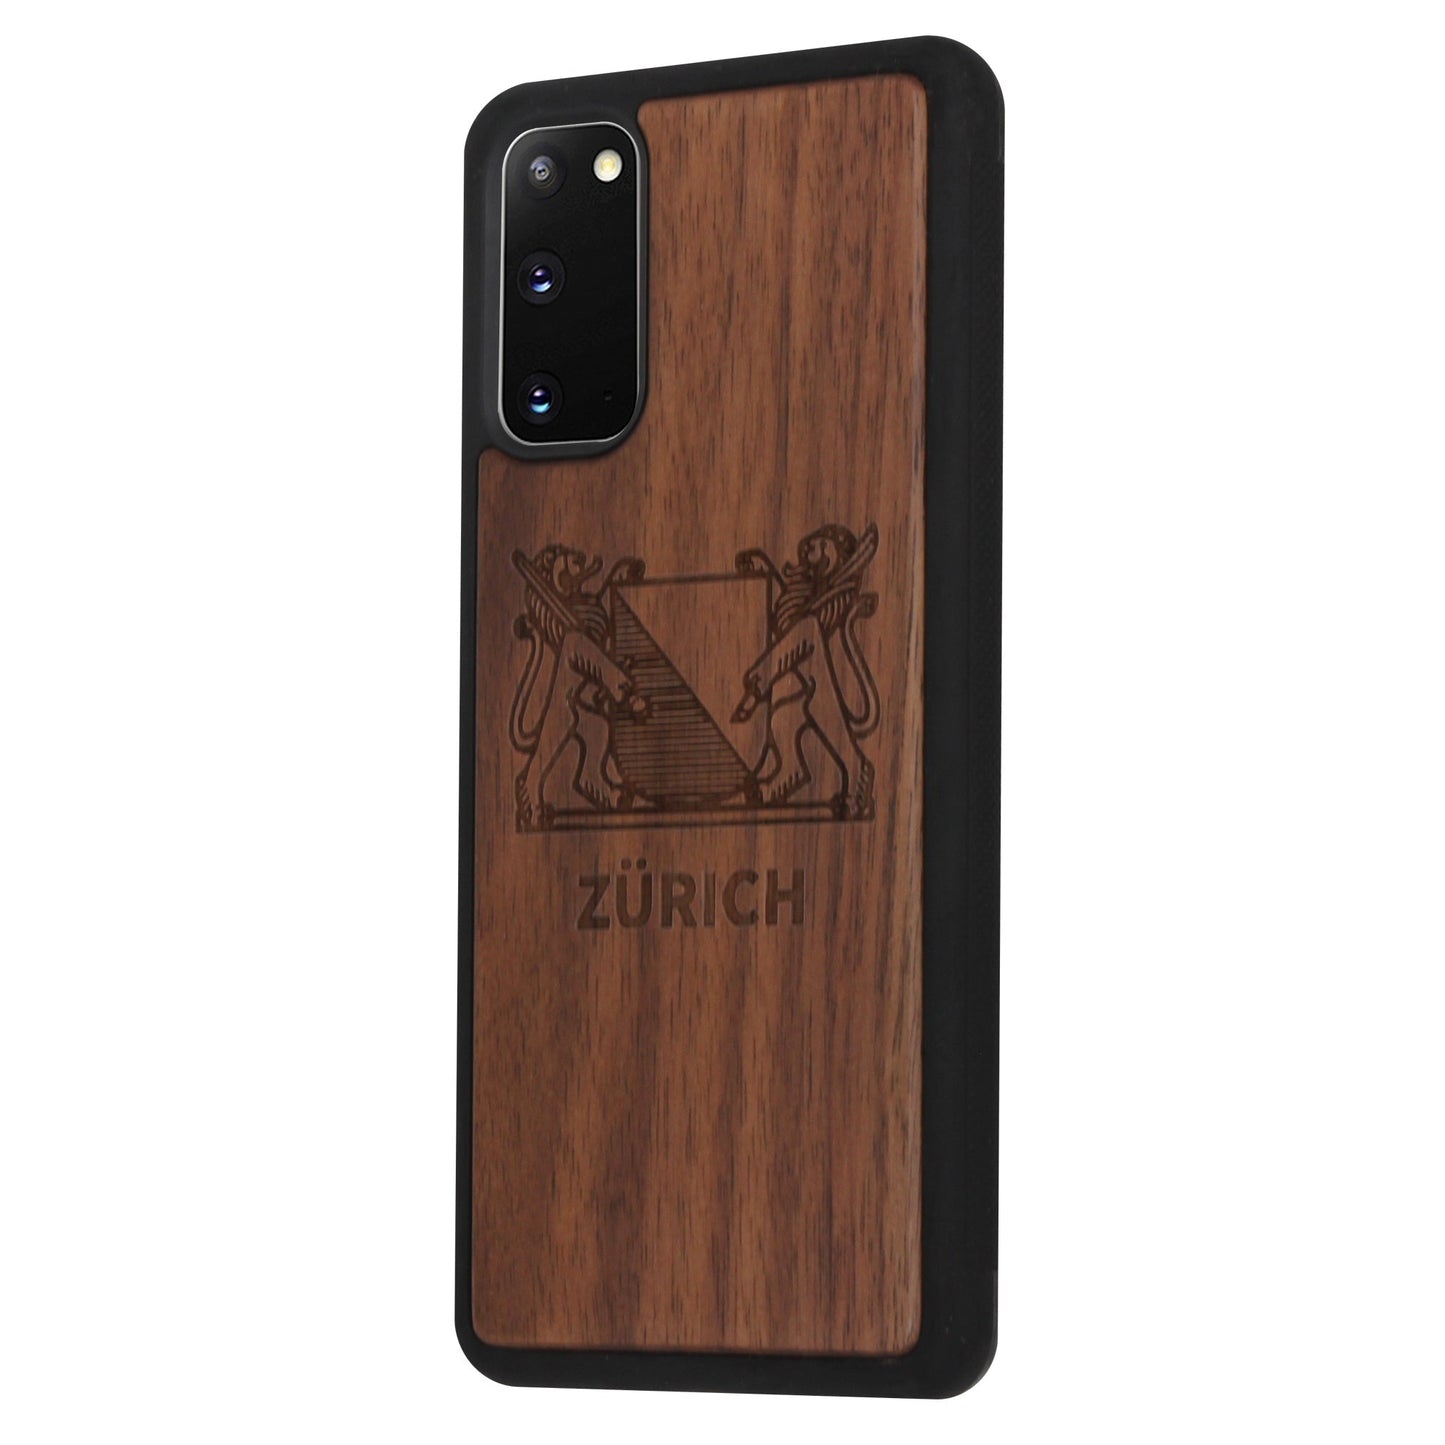 Zurich Coat of Arms Eden Case made of walnut wood for Samsung Galaxy S20